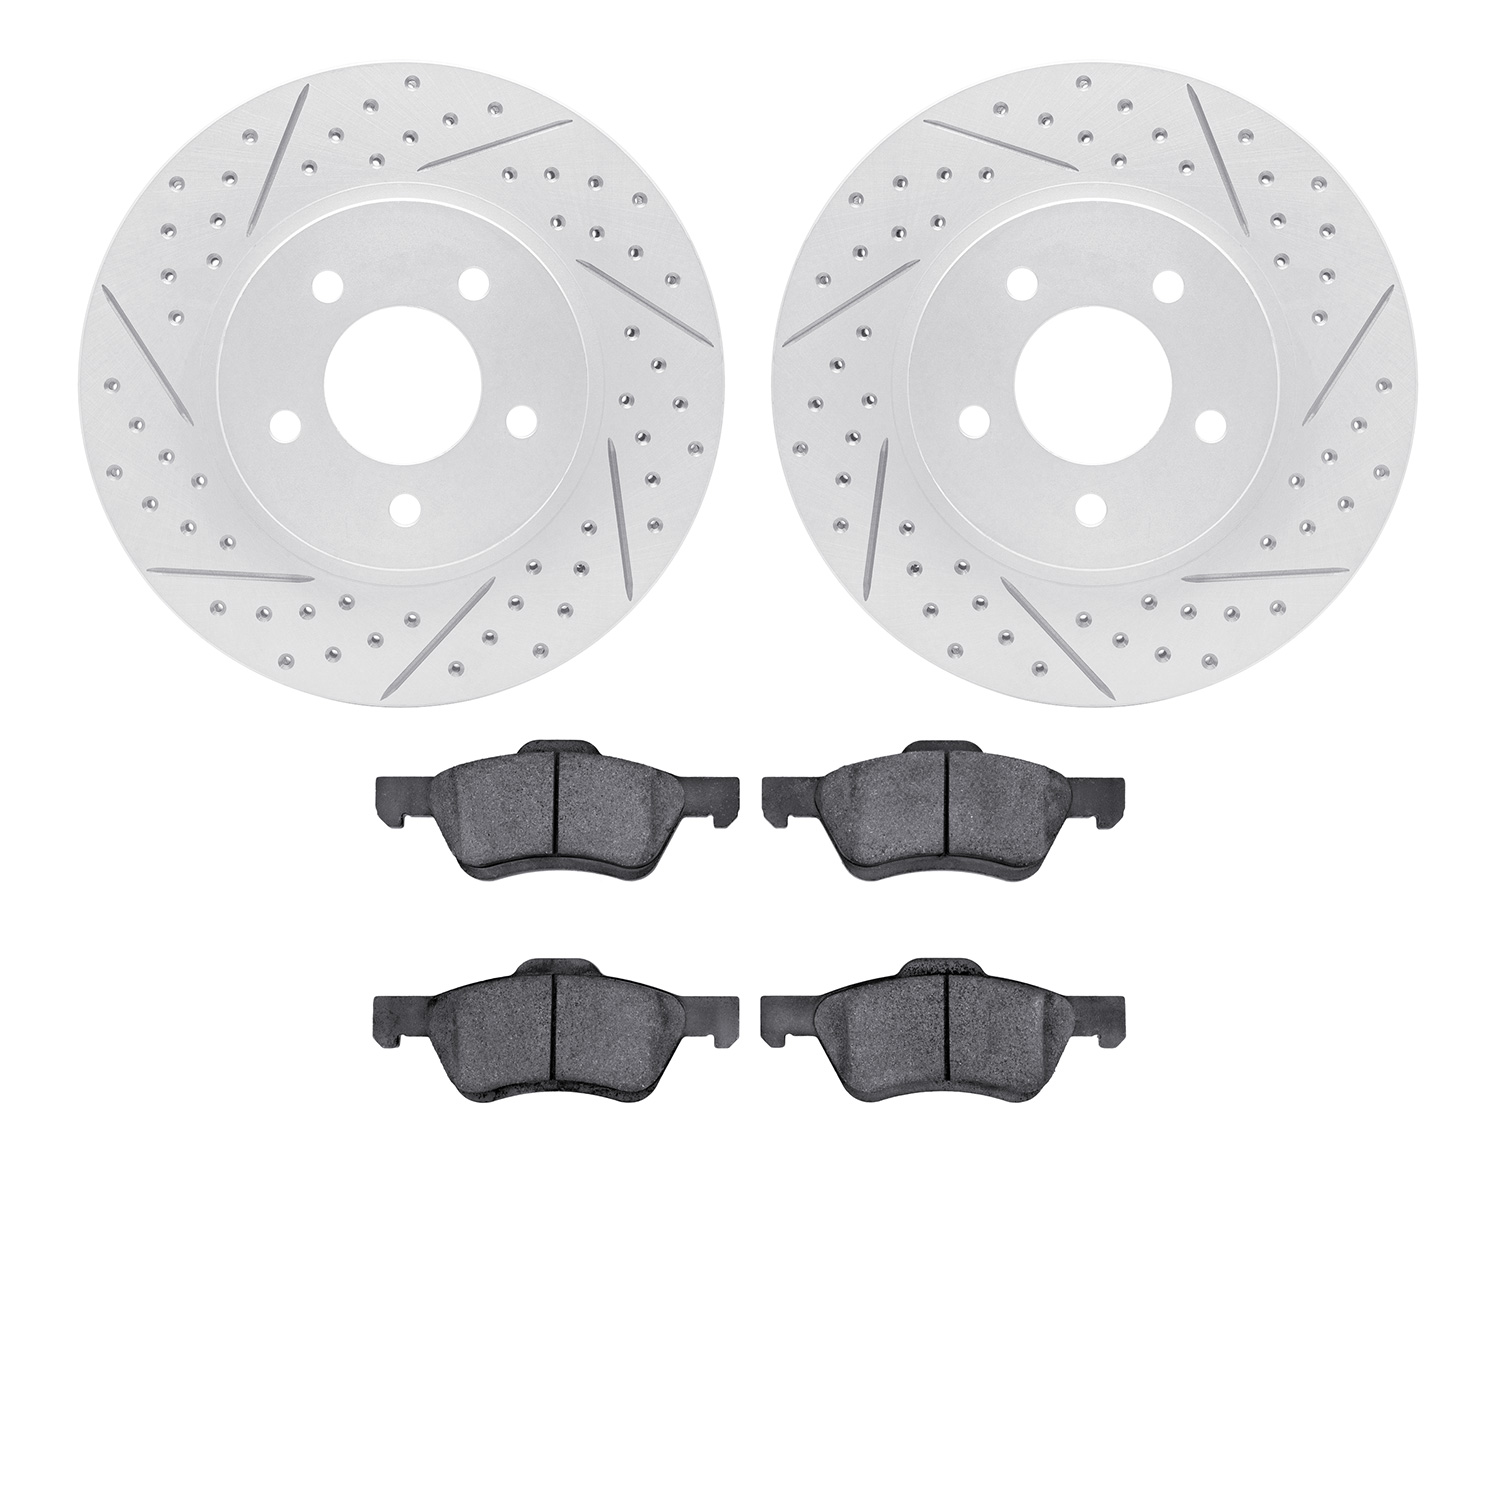 2502-54173 Geoperformance Drilled/Slotted Rotors w/5000 Advanced Brake Pads Kit, 2009-2012 Ford/Lincoln/Mercury/Mazda, Position: